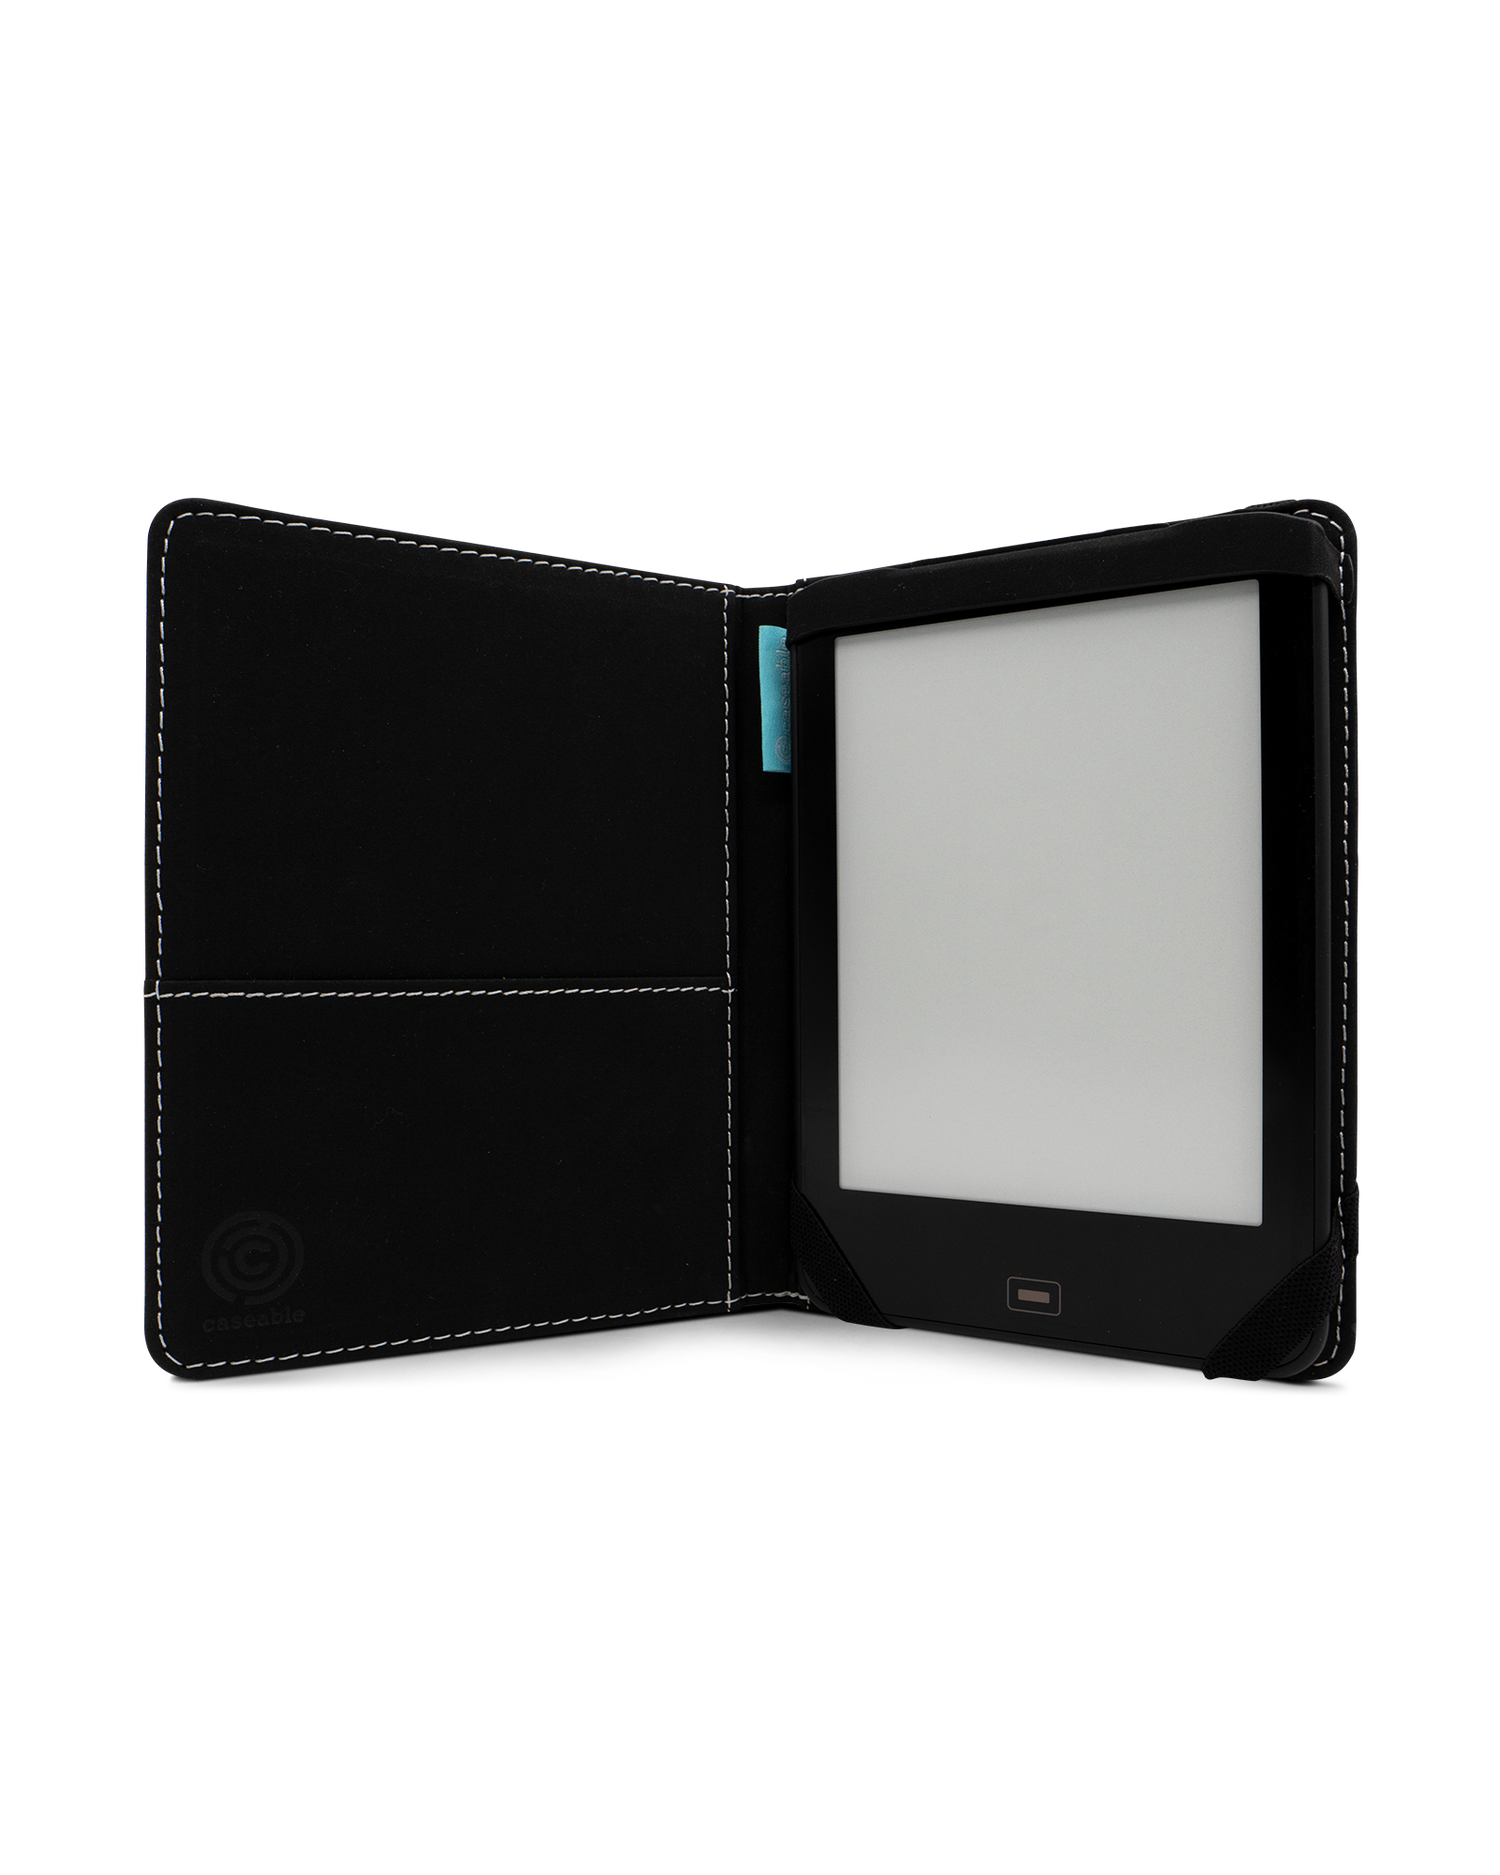 BLACK eReader Case for tolino vision 1 to 4 HD: Opened interior view